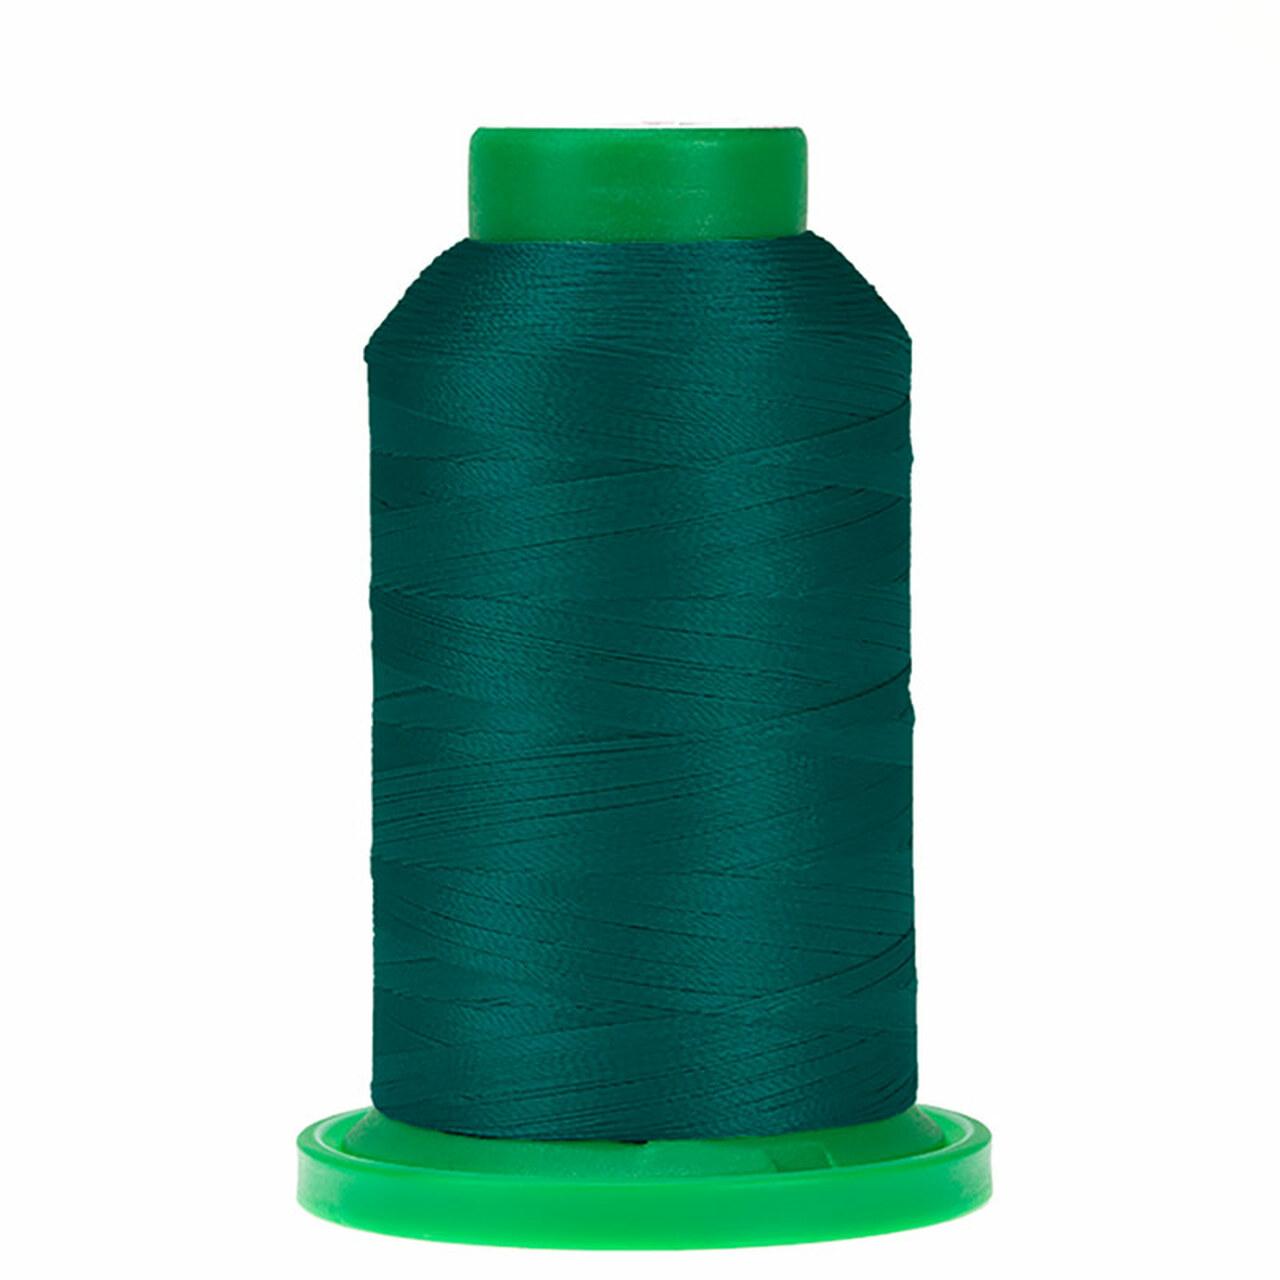 Thread - Isacord - 1000m - 2922-4625 - Seagreen - SPECIAL ORDER